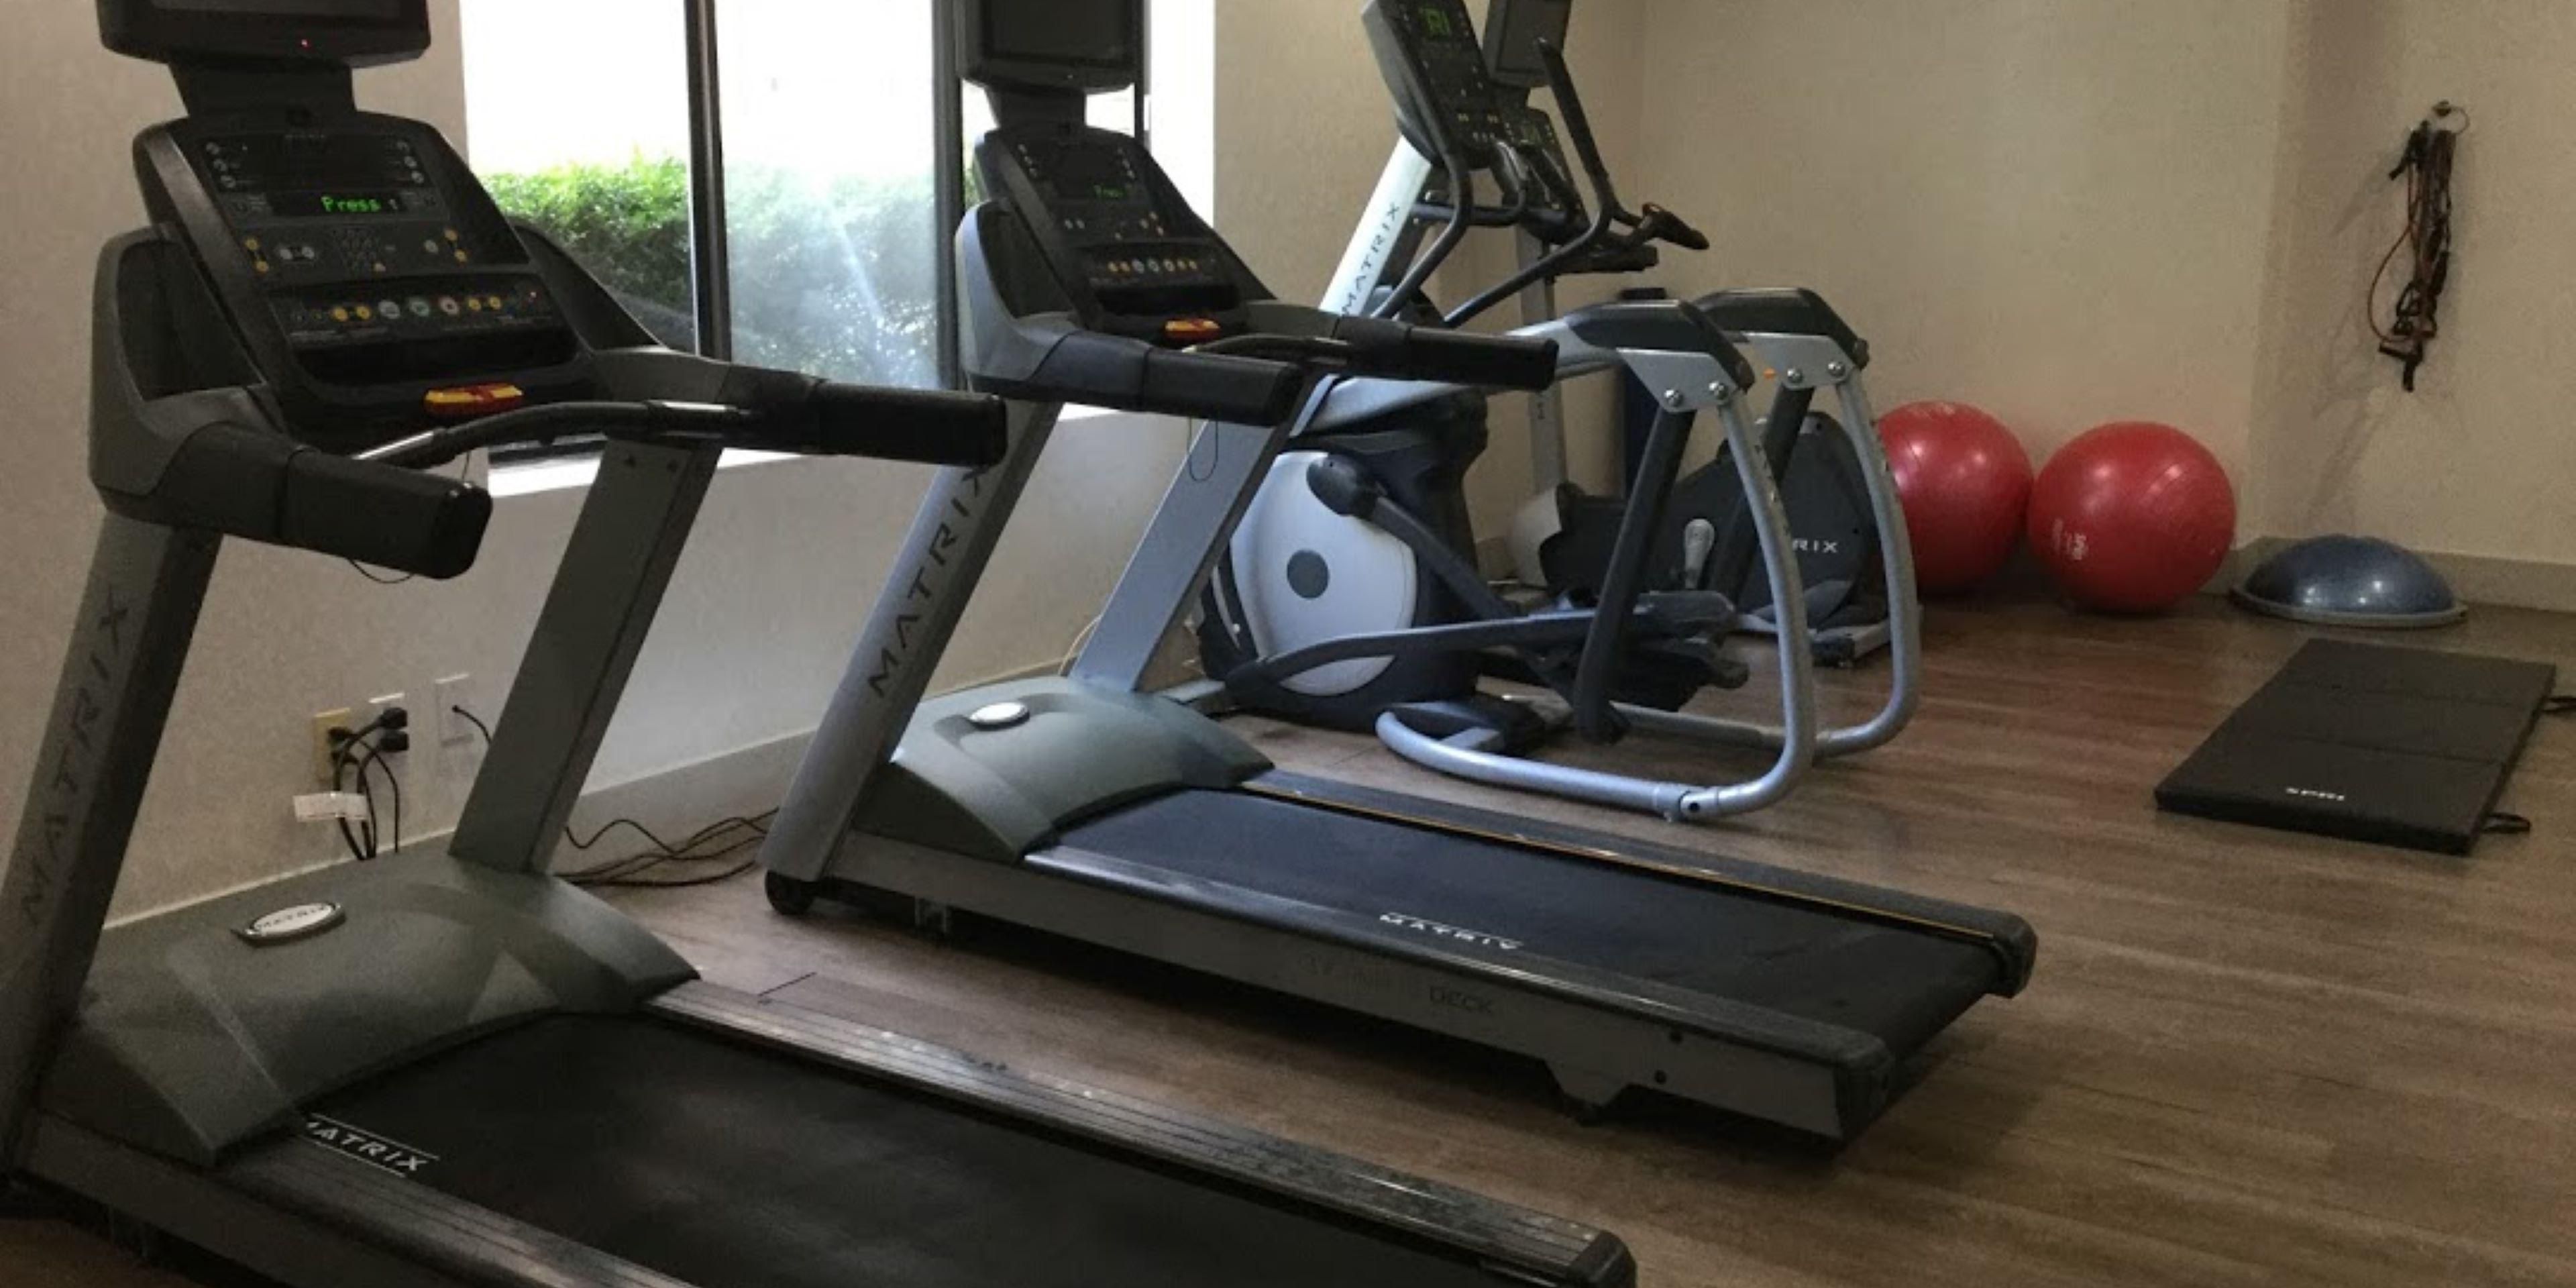 Get your sweat on in our complimentary, fully equipped Fitness Center with elliptical machines, free weights, treadmills, stationary bicycles, yoga mats, weight bench and rowing machine.